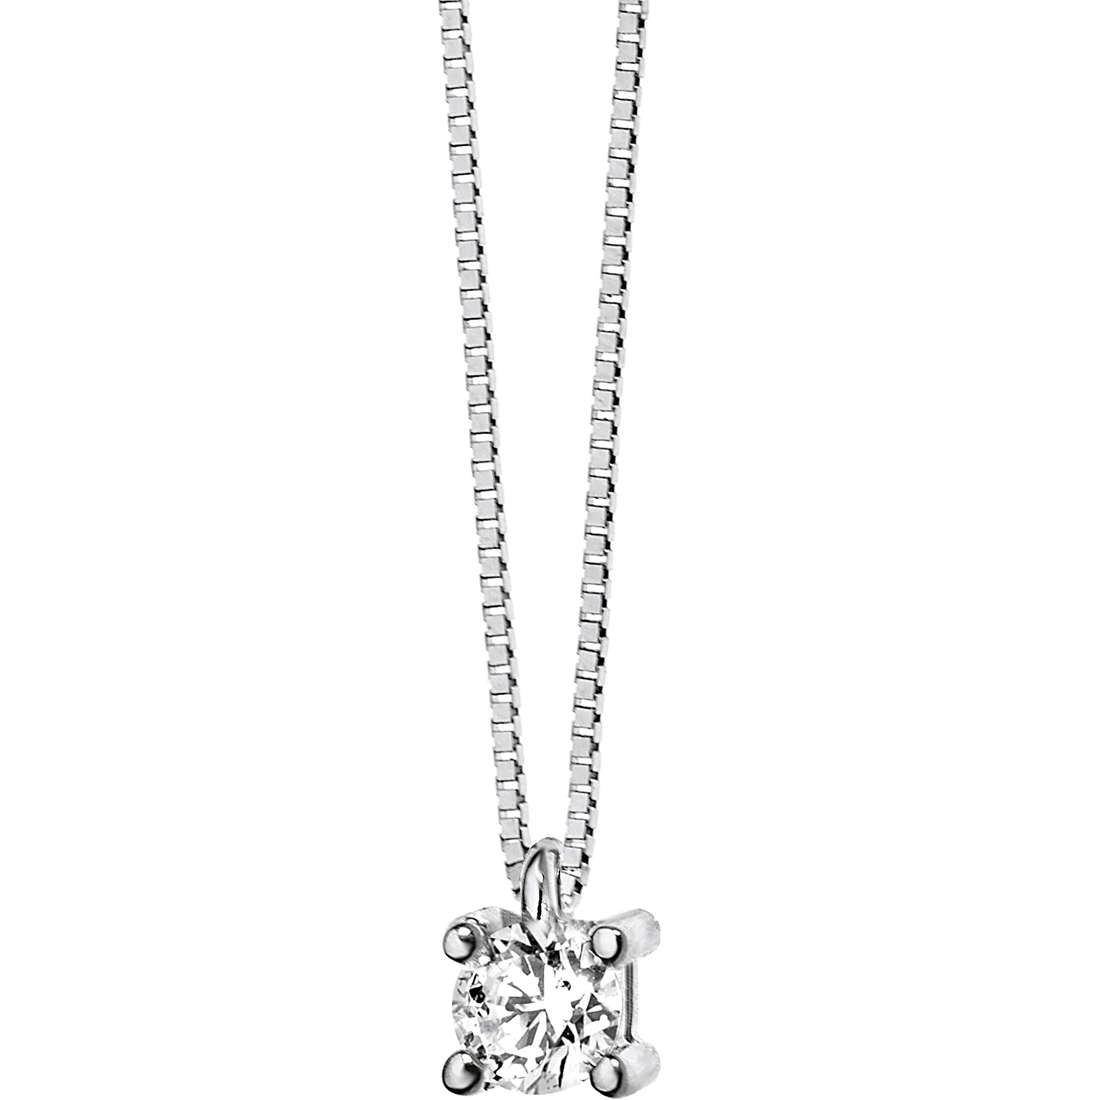 collier Point Lumineux Comete Or 18 kt GLB 1274